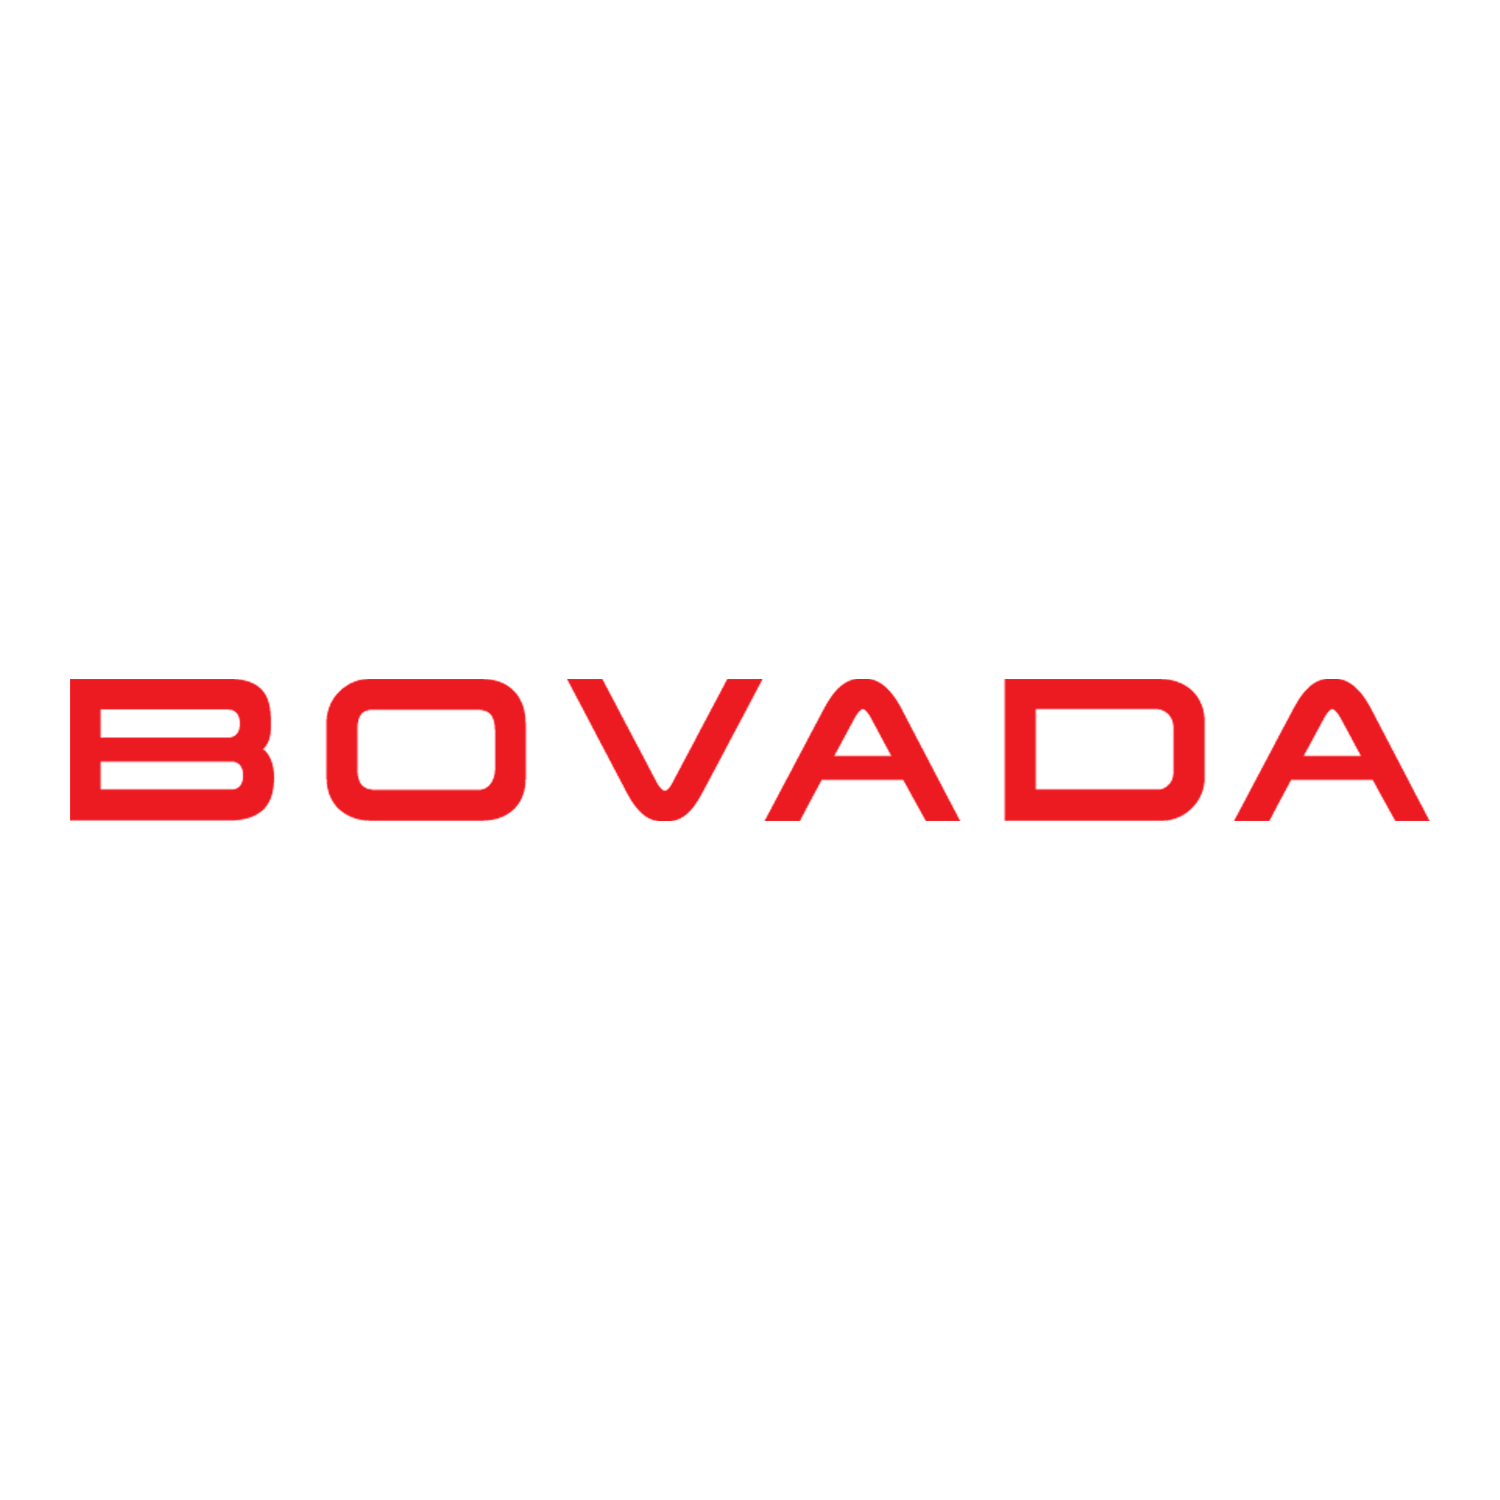 Bovada offers legal cricket betting in the United States.